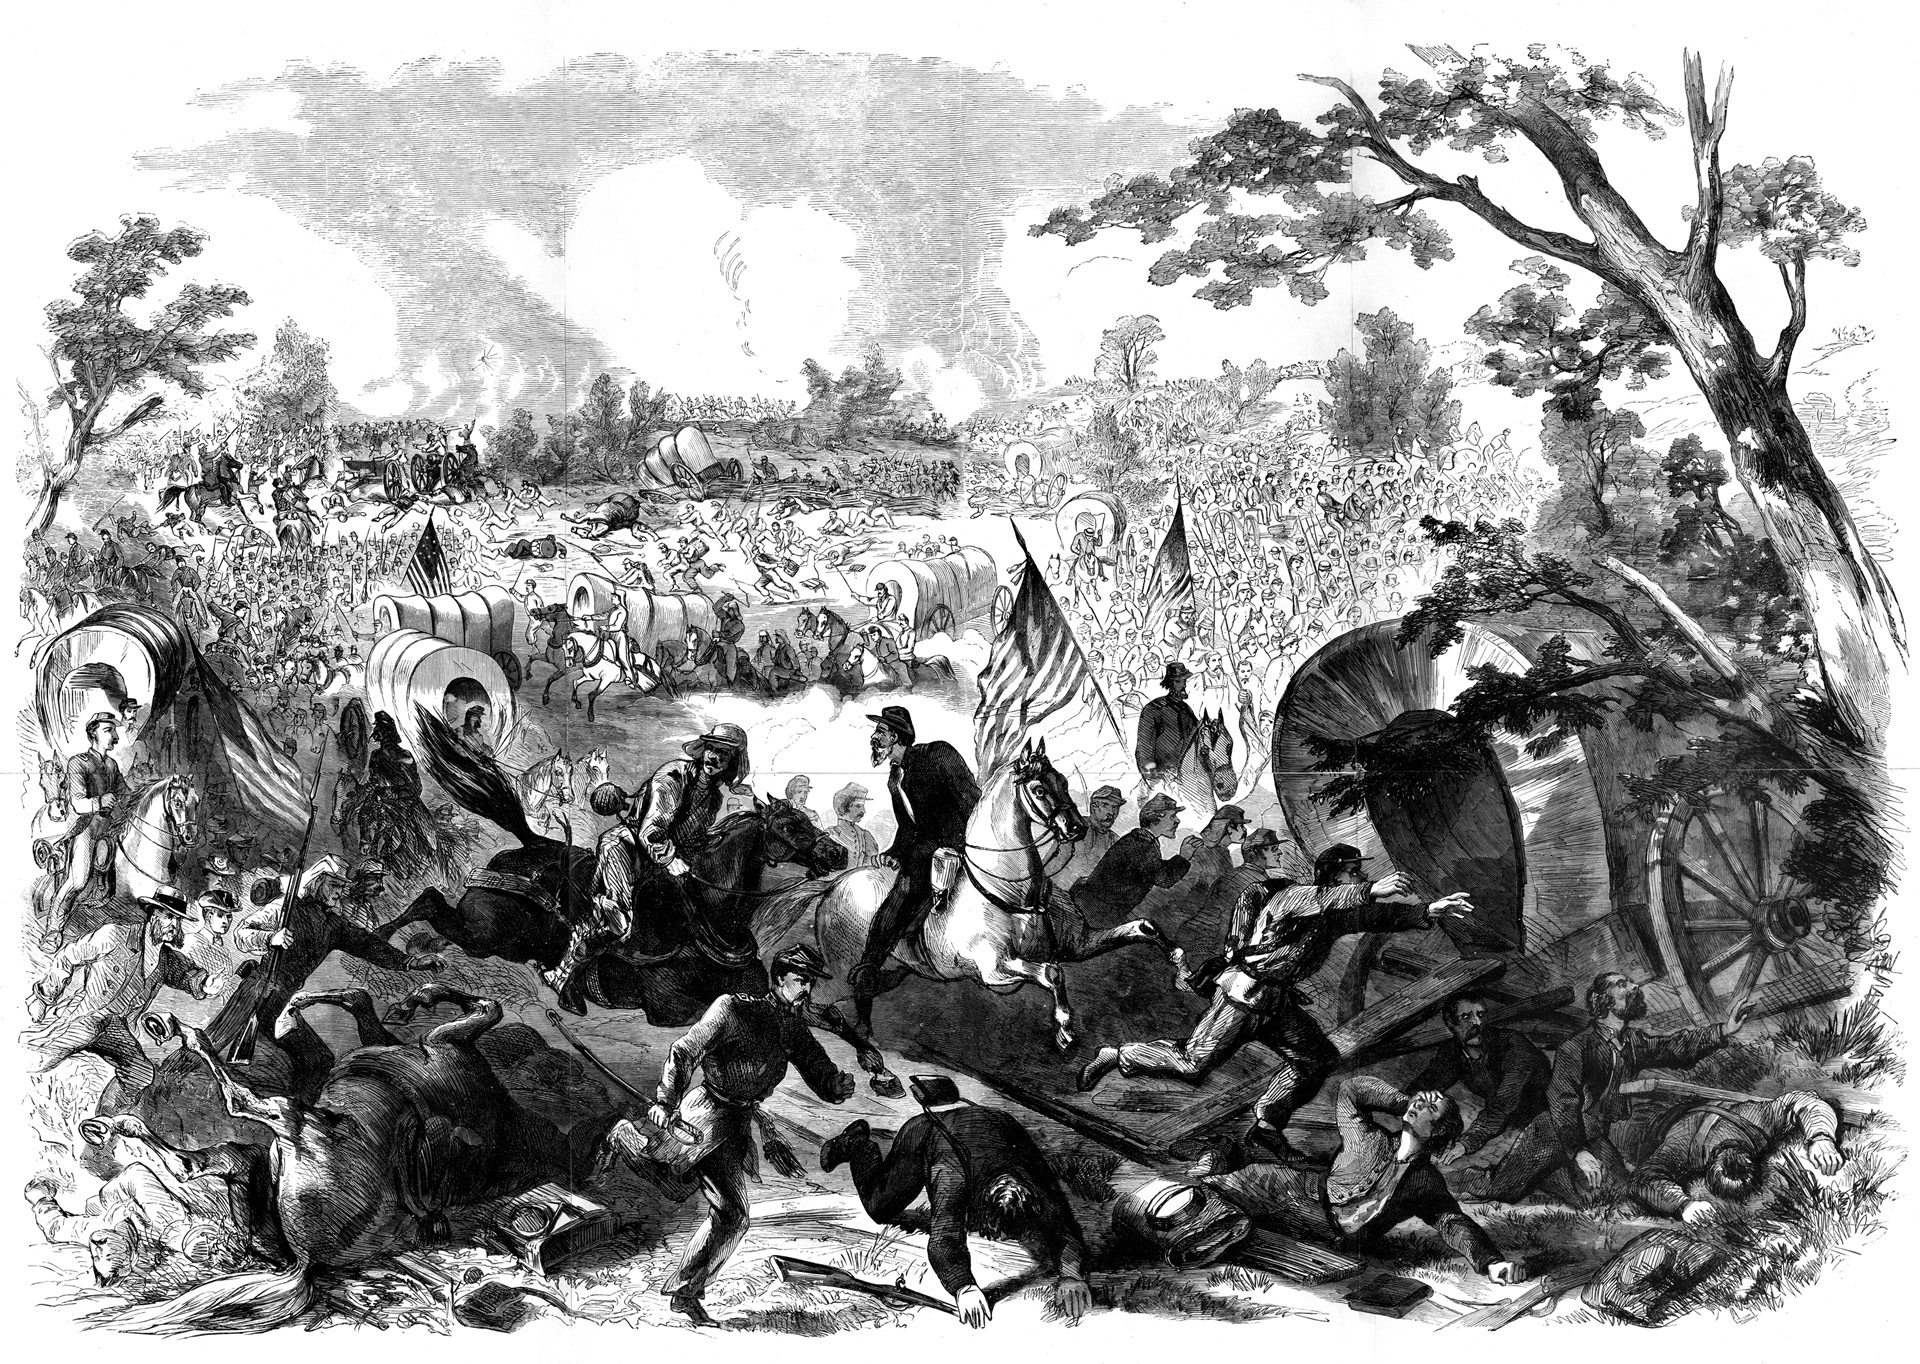  A small body of Confederates on the Warrenton Turnpike crossed Bull Run in order to cut off the Federal units retreating via the upper ford at Sudley Springs. When Confederate artillery shelled the bridge over Cub Run, the Federal retreat turned into a stampede as the demoralized troops raced back to Washington.